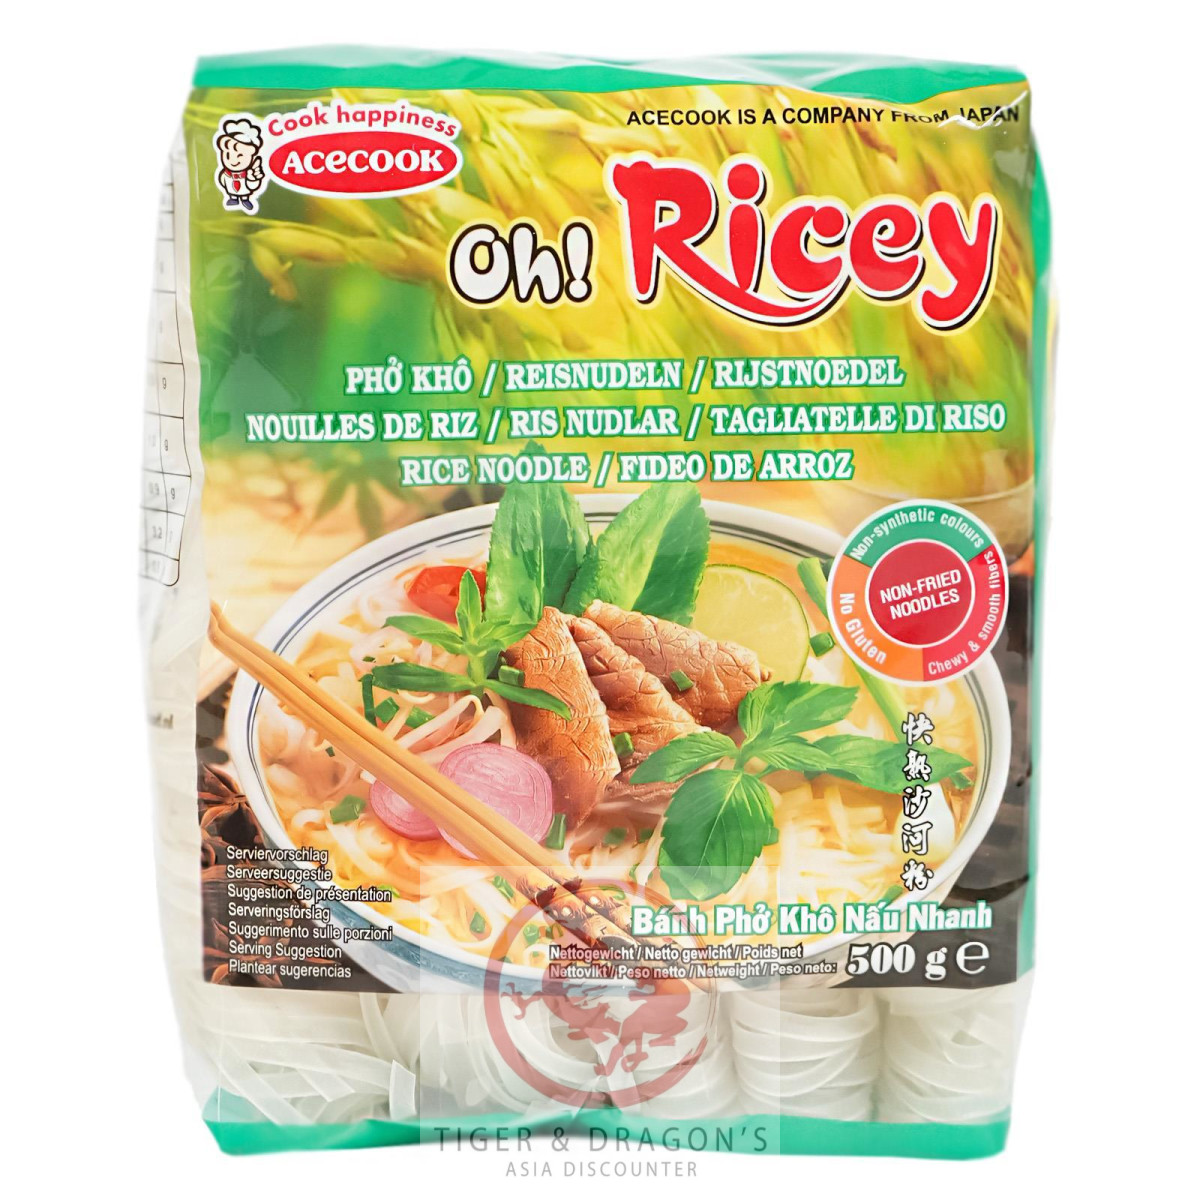 Acecook Oh ricey Banh Pho Reisnudeln 500g